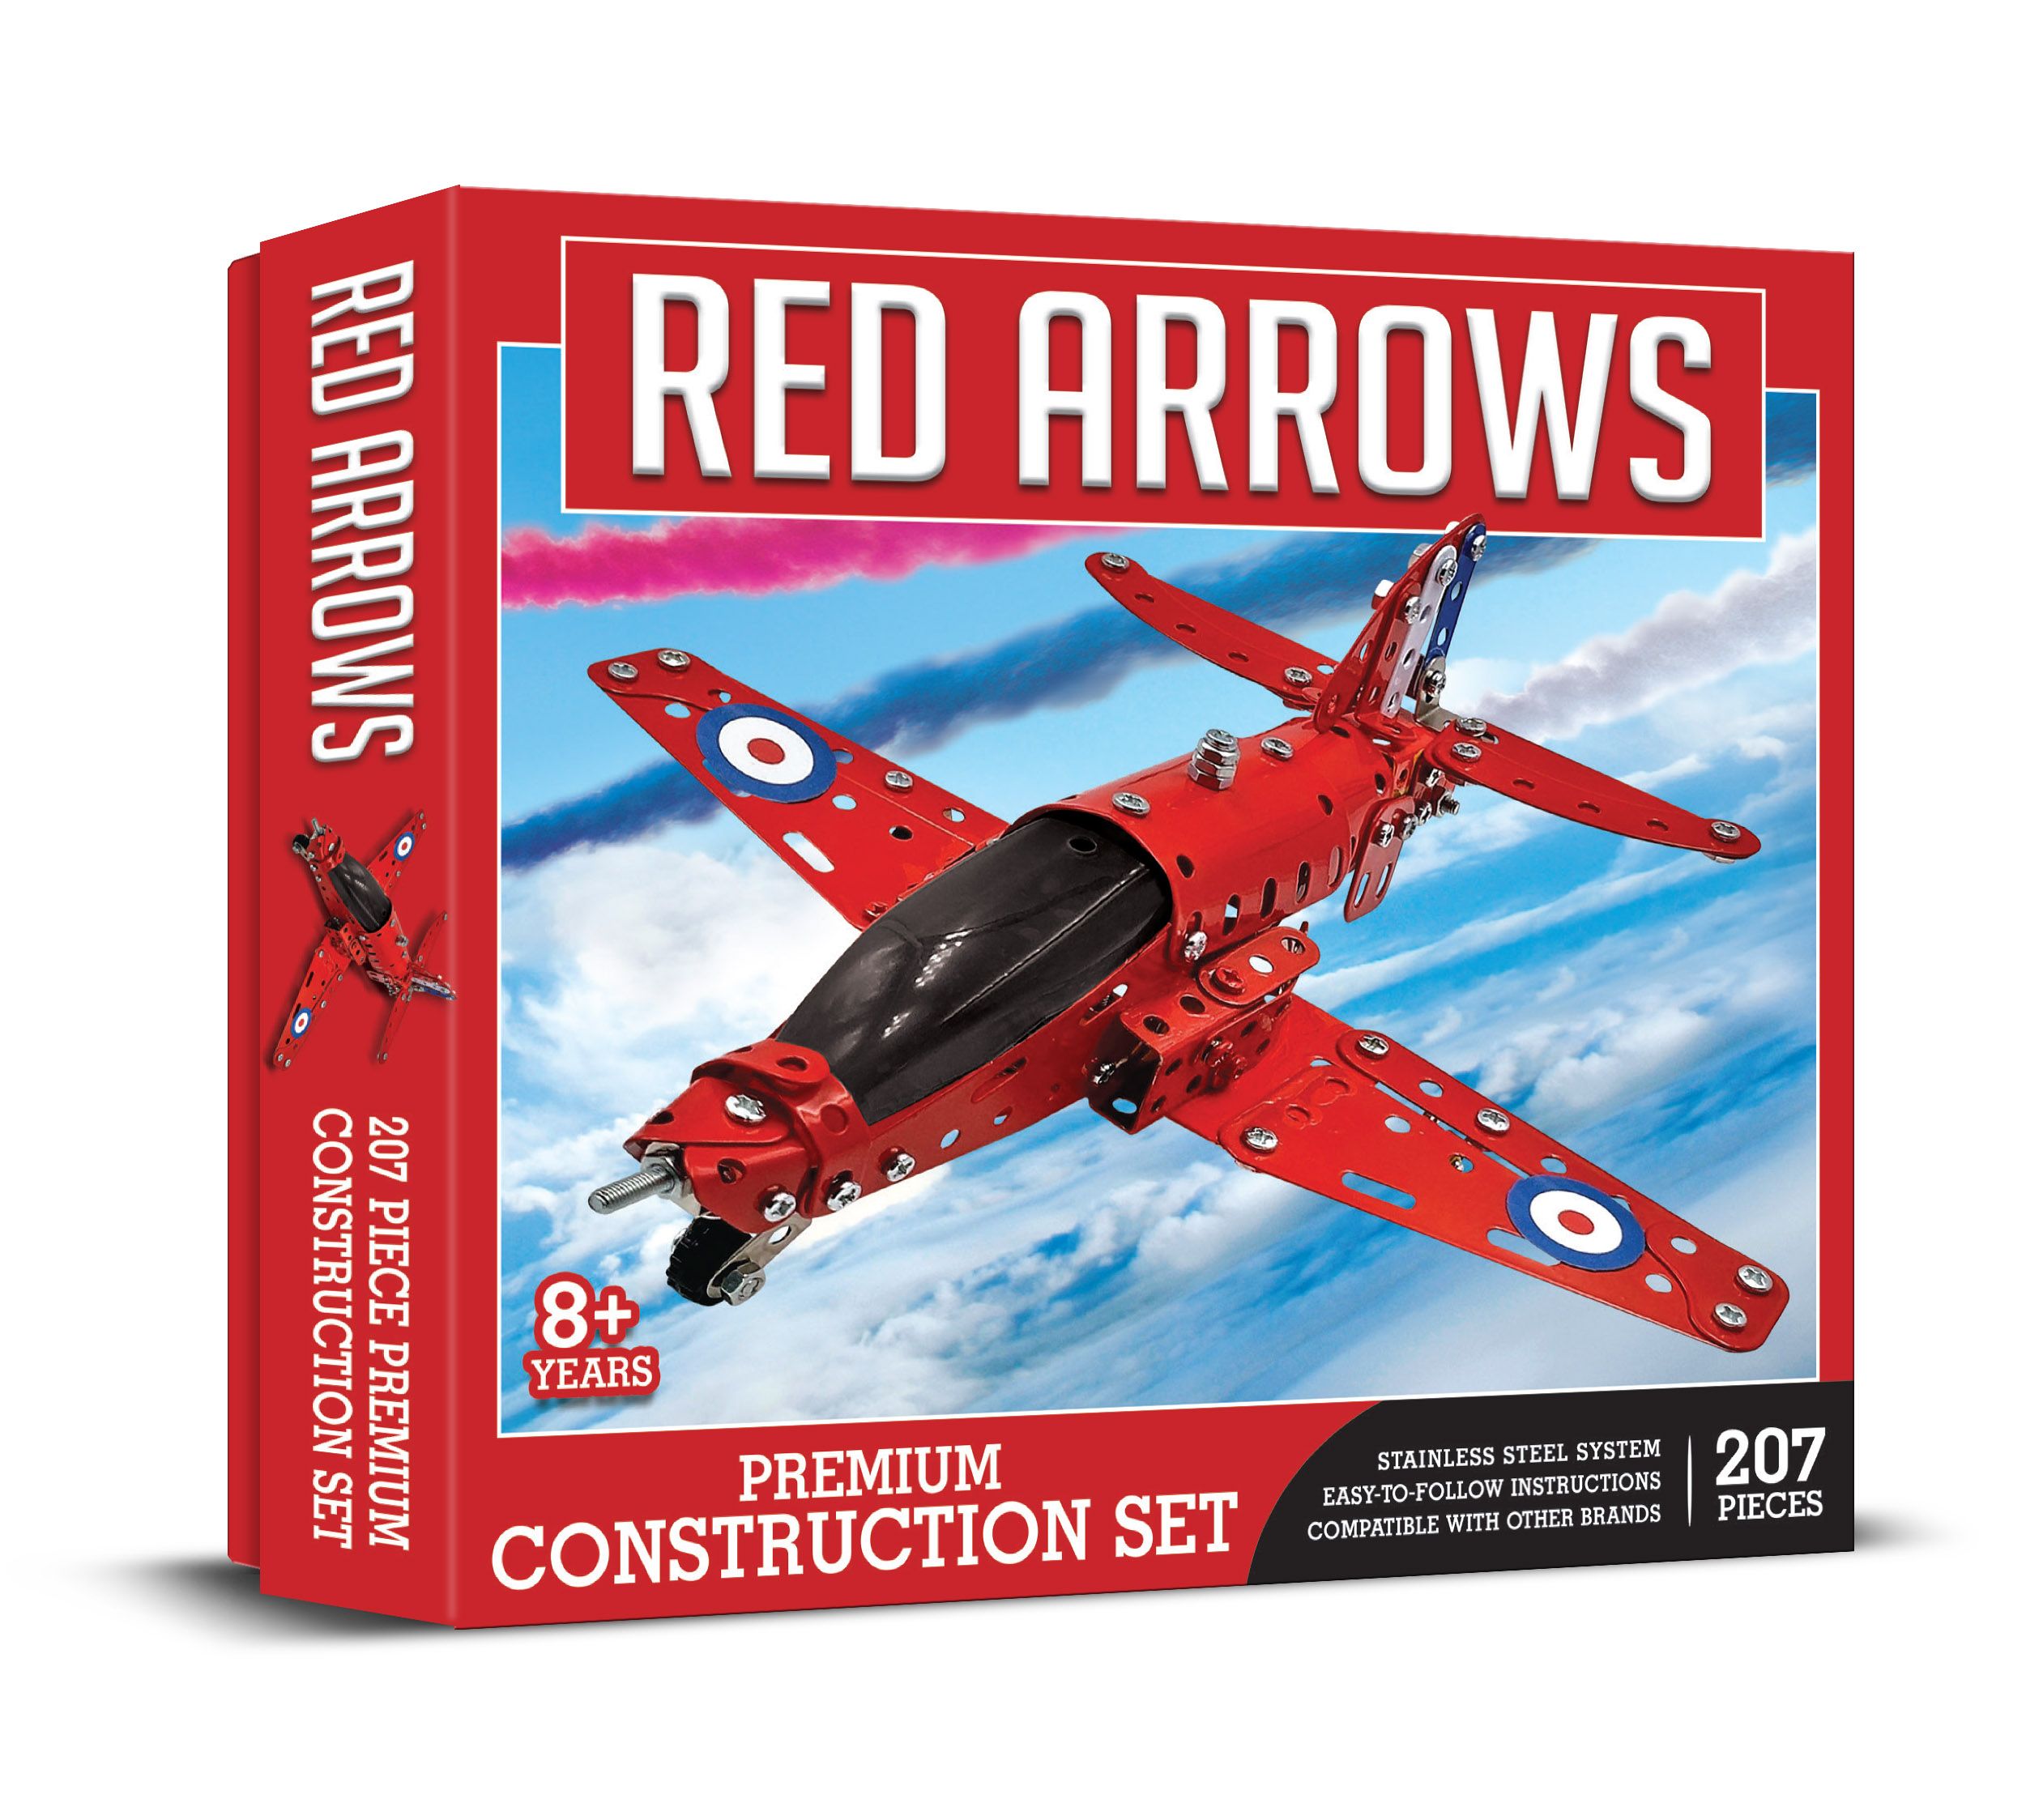 Demand 0019 Red Arrows Hawk Drilled Metal Construction Set (Meccano Style) ###